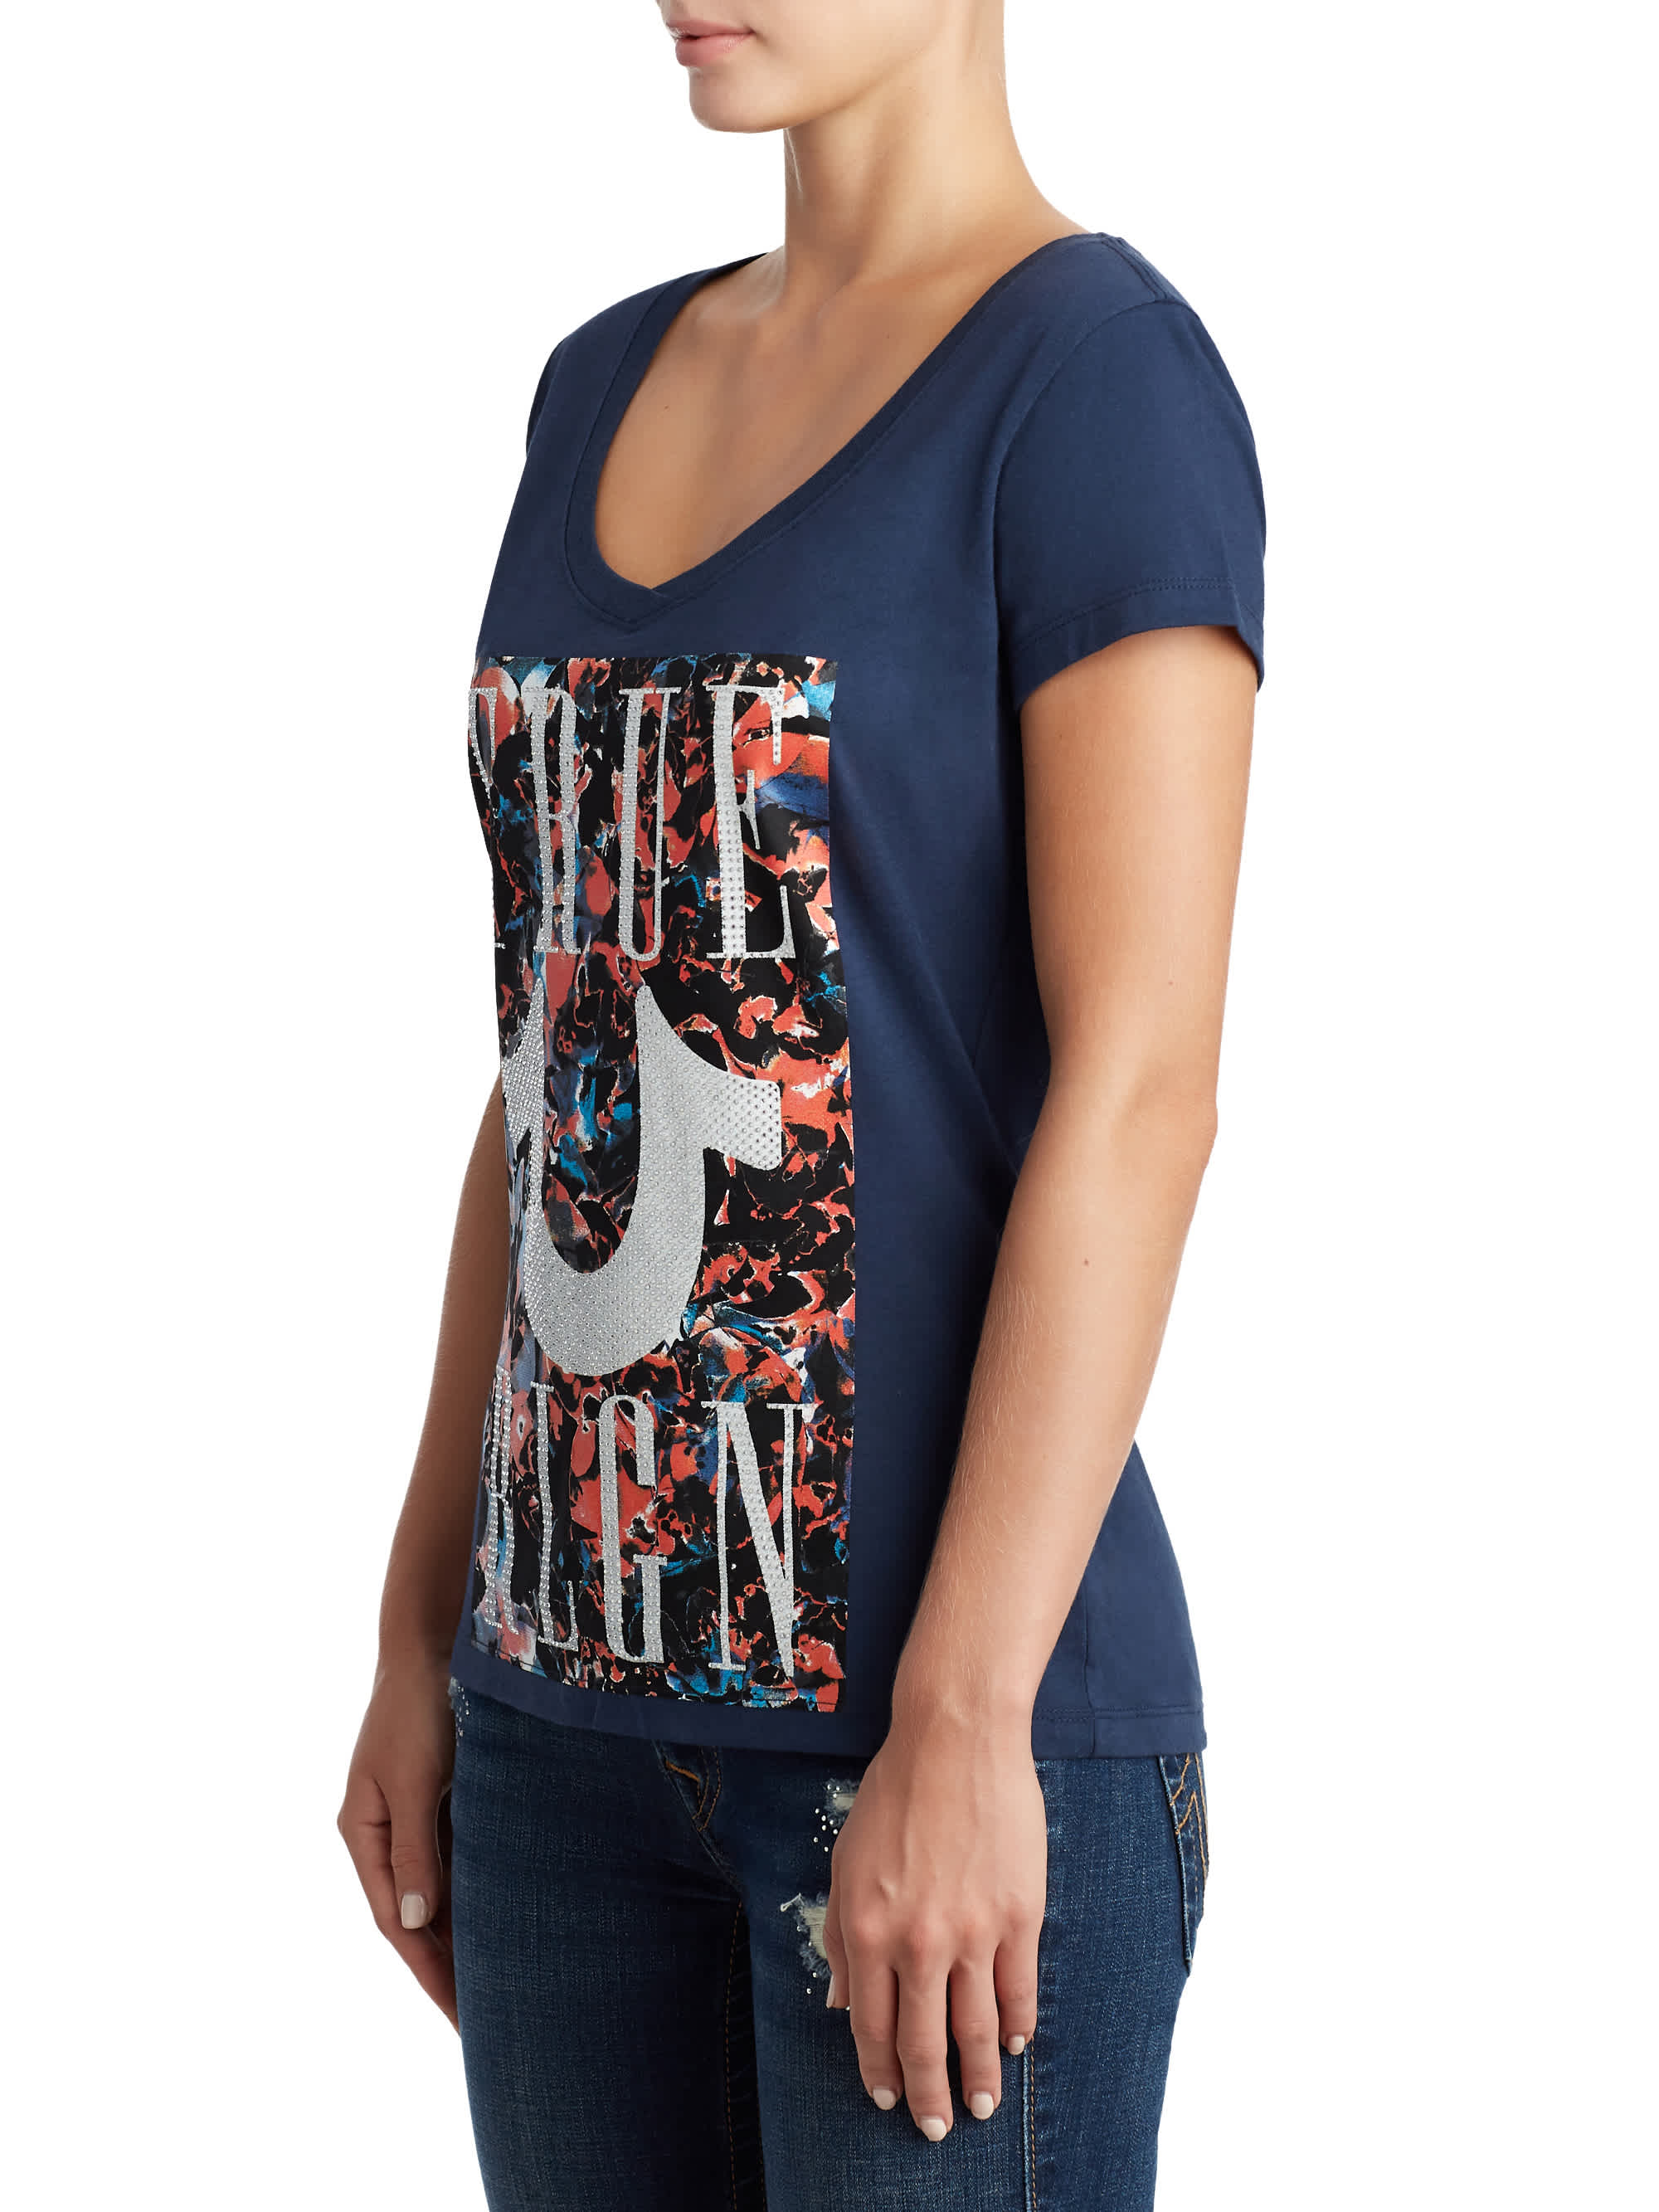 WOMENS CRYSTAL EMBELLISHED FLORAL GRAPHIC TEE